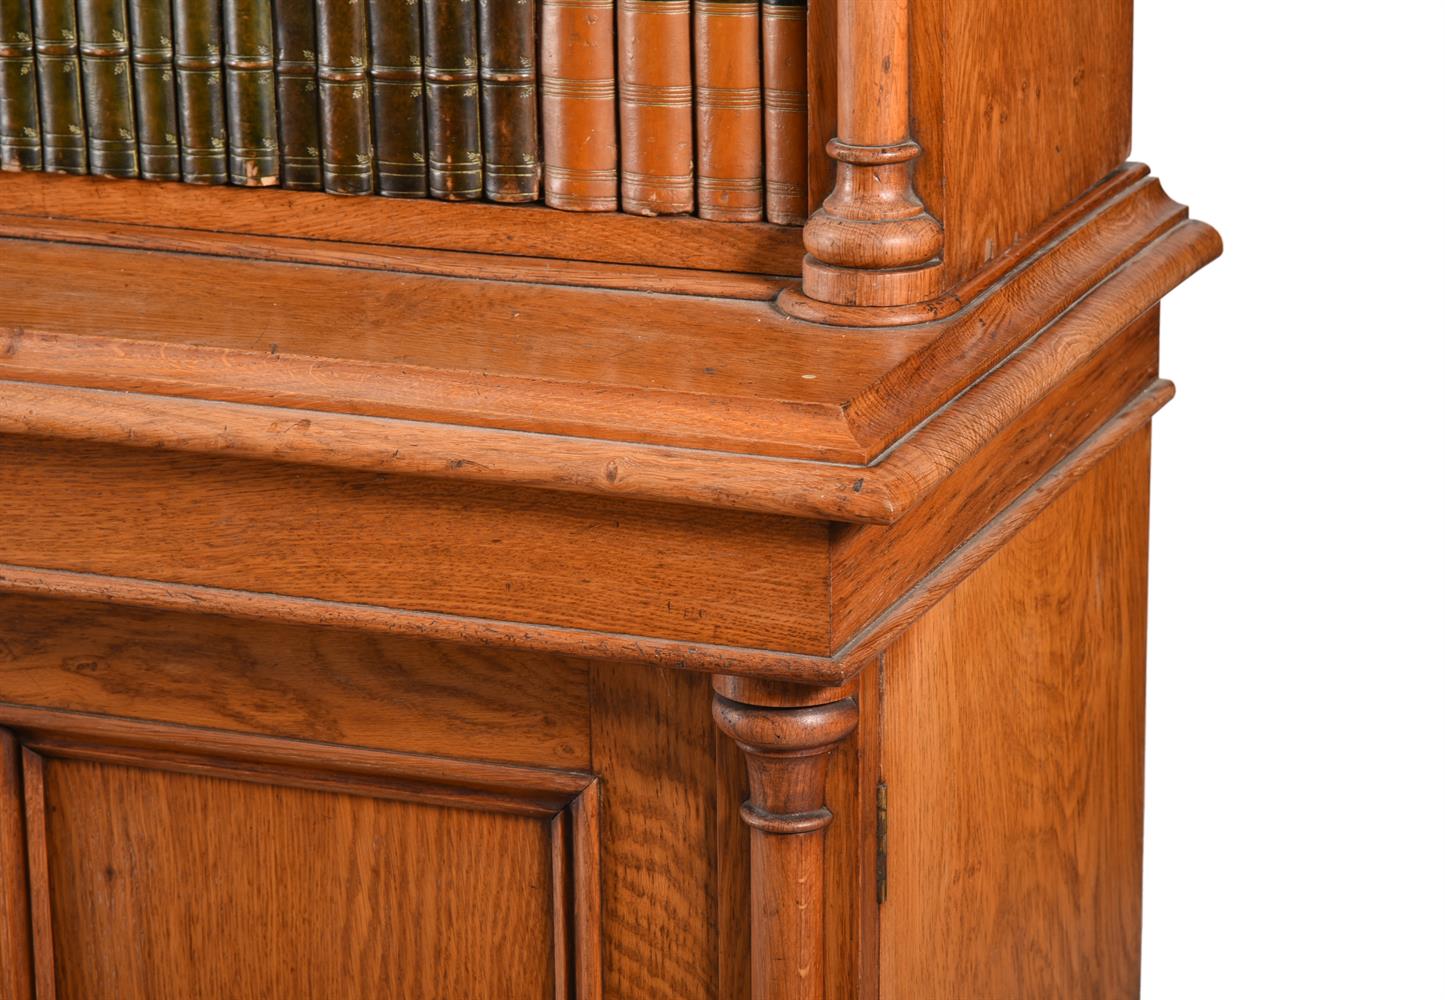 A VICTORIAN OAK LIBRARY BOOKCASE, LATE 19TH CENTURY - Image 2 of 3